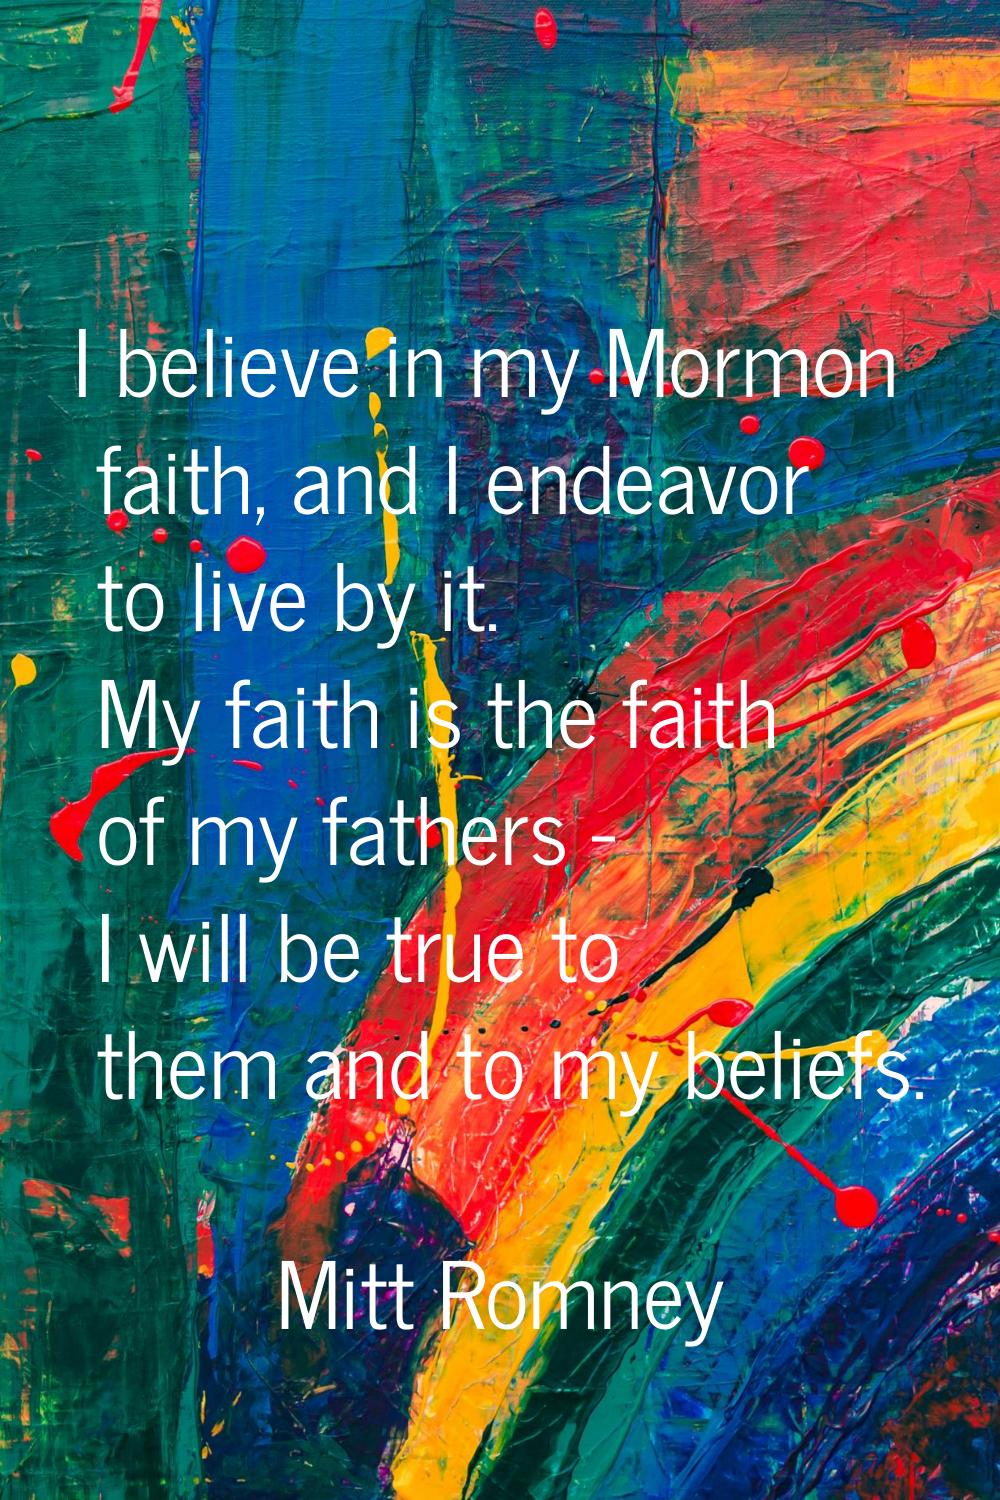 I believe in my Mormon faith, and I endeavor to live by it. My faith is the faith of my fathers - I